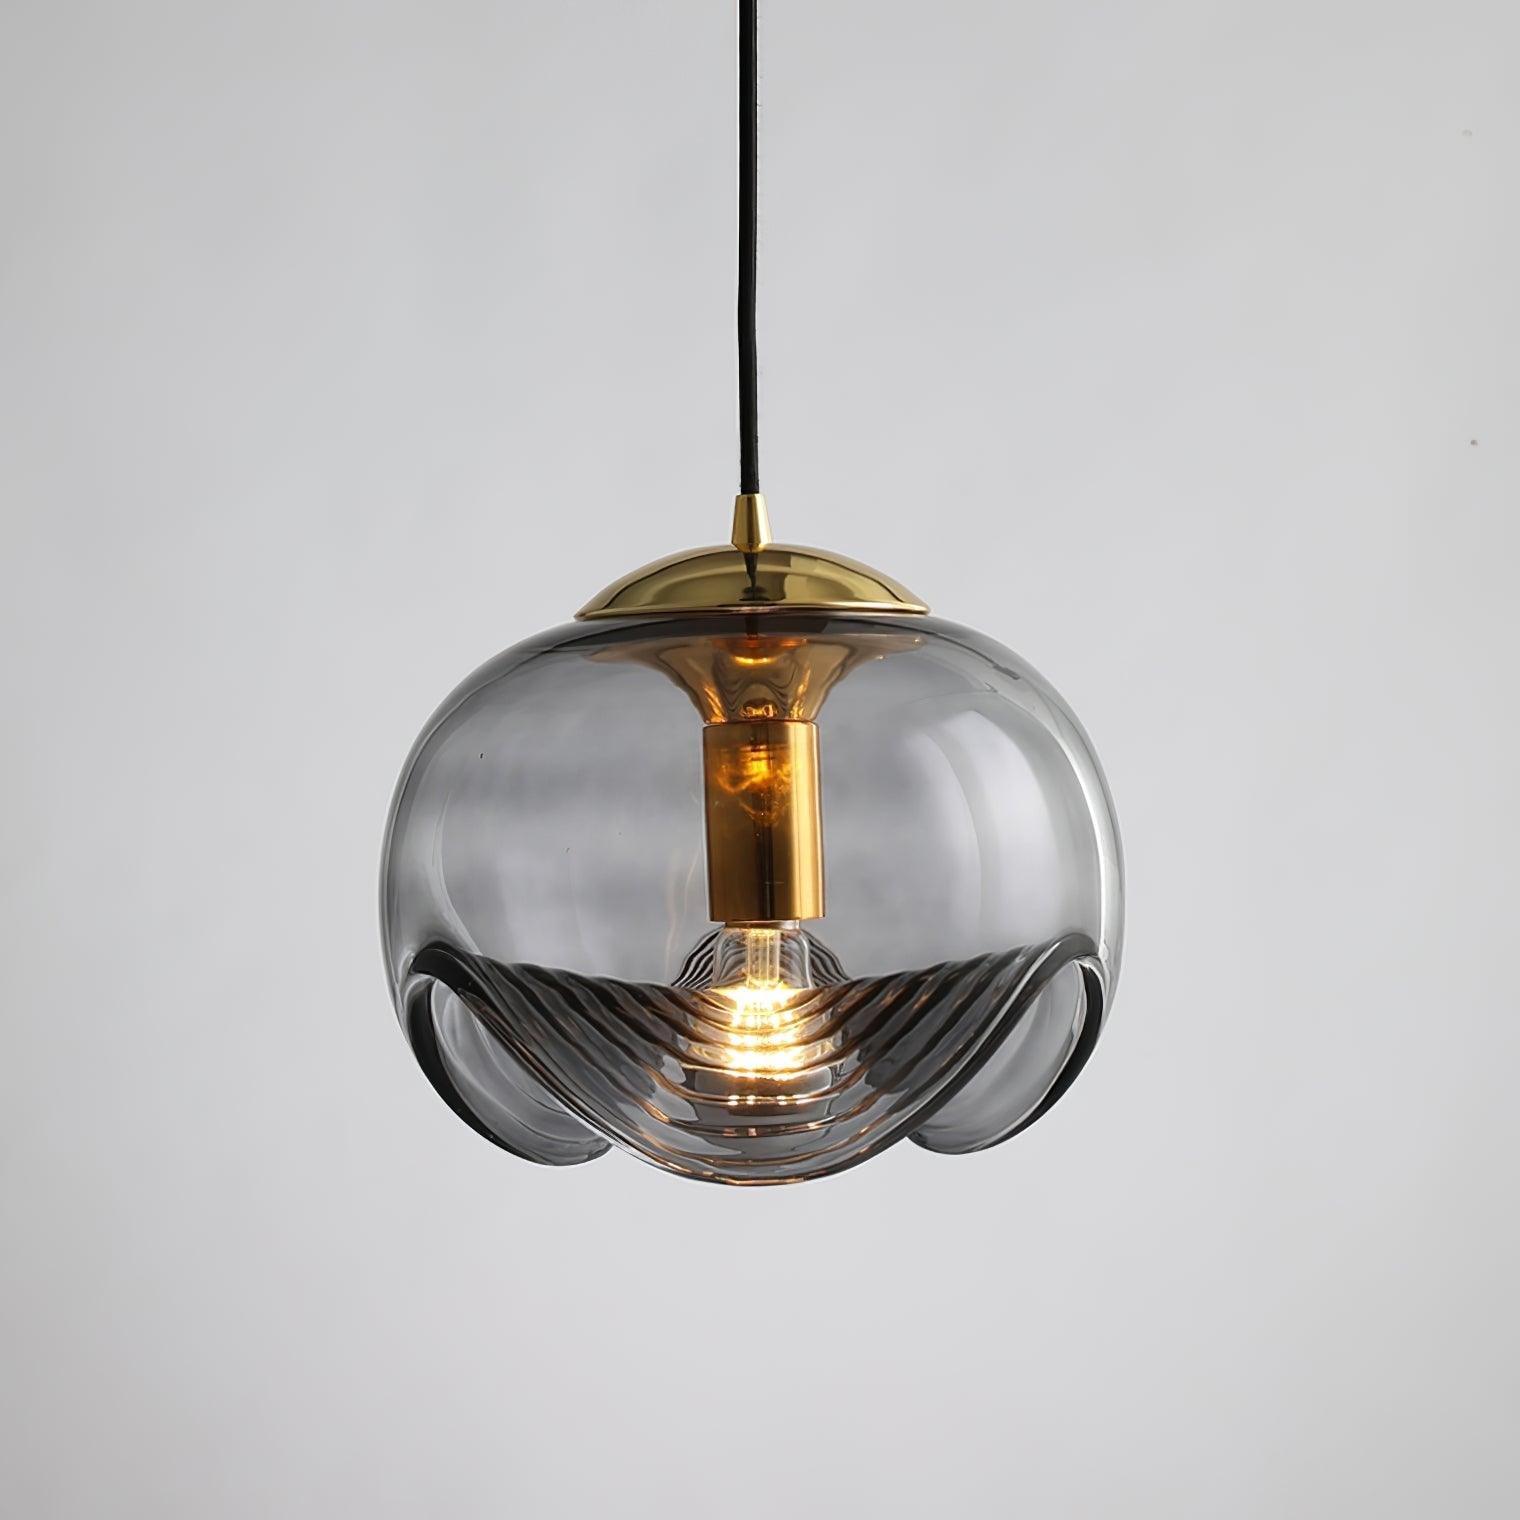 Gold and Smoky Grey Wave Pendant Light, Diameter 9.8 inches x Height 7.1 inches (25cm x 18cm)